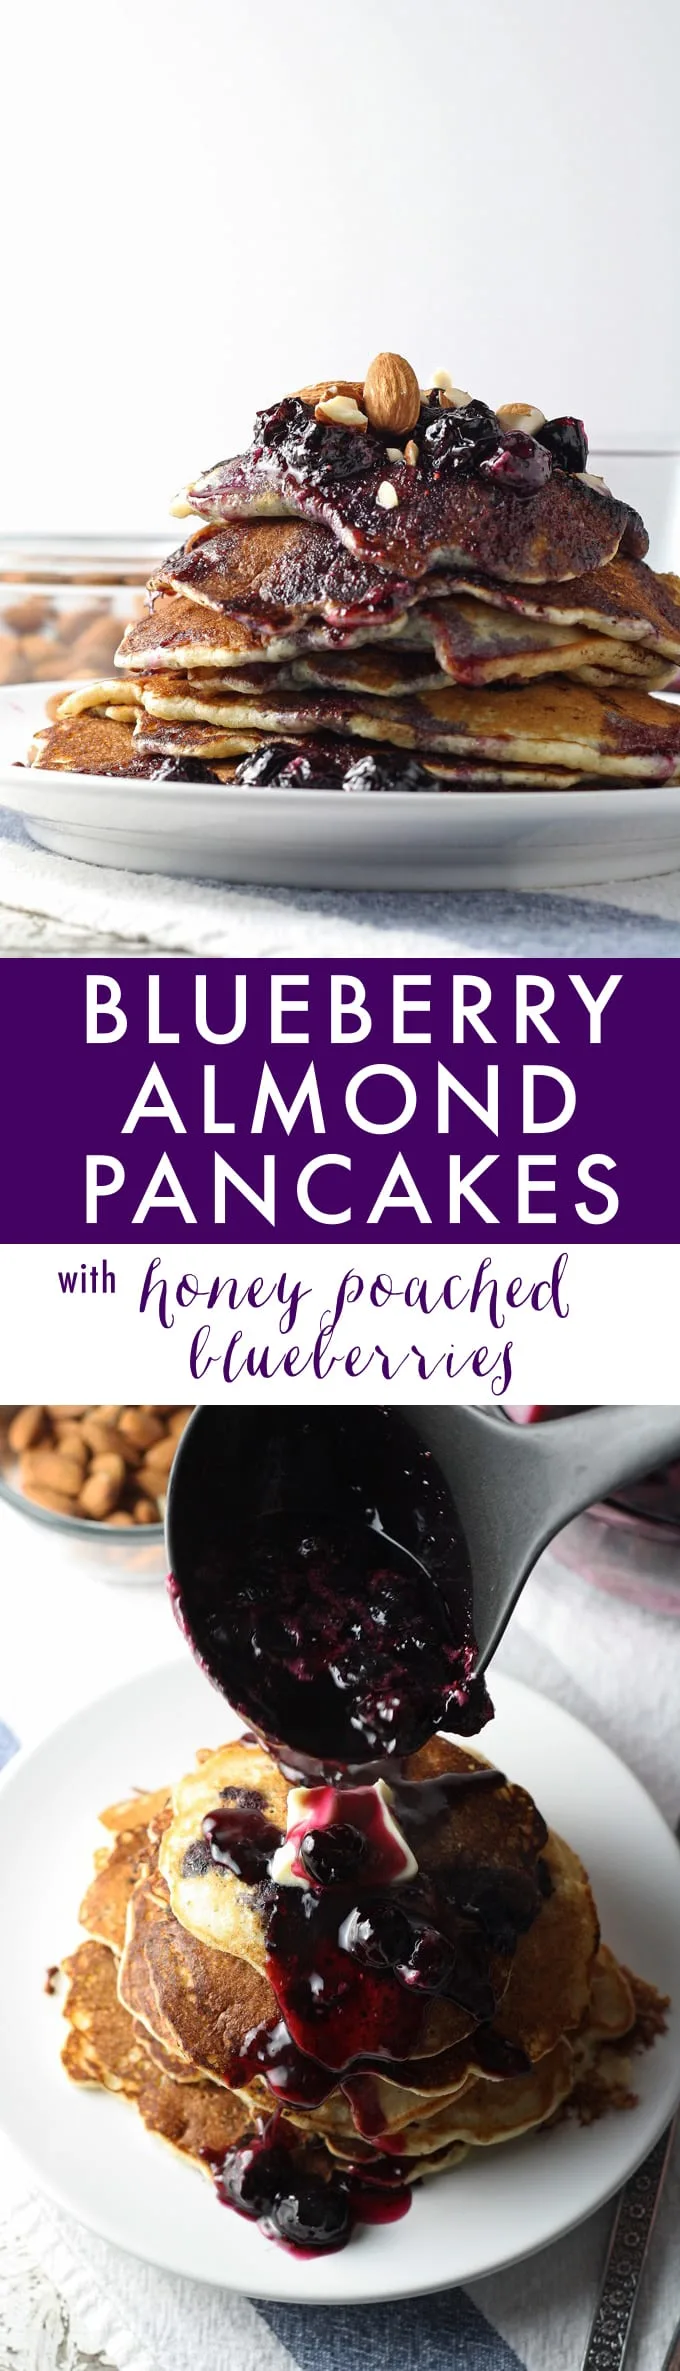 Start your day with these delicious blueberry almond pancakes and homemade blueberry syrup! #breakfast honeyandbirch.com